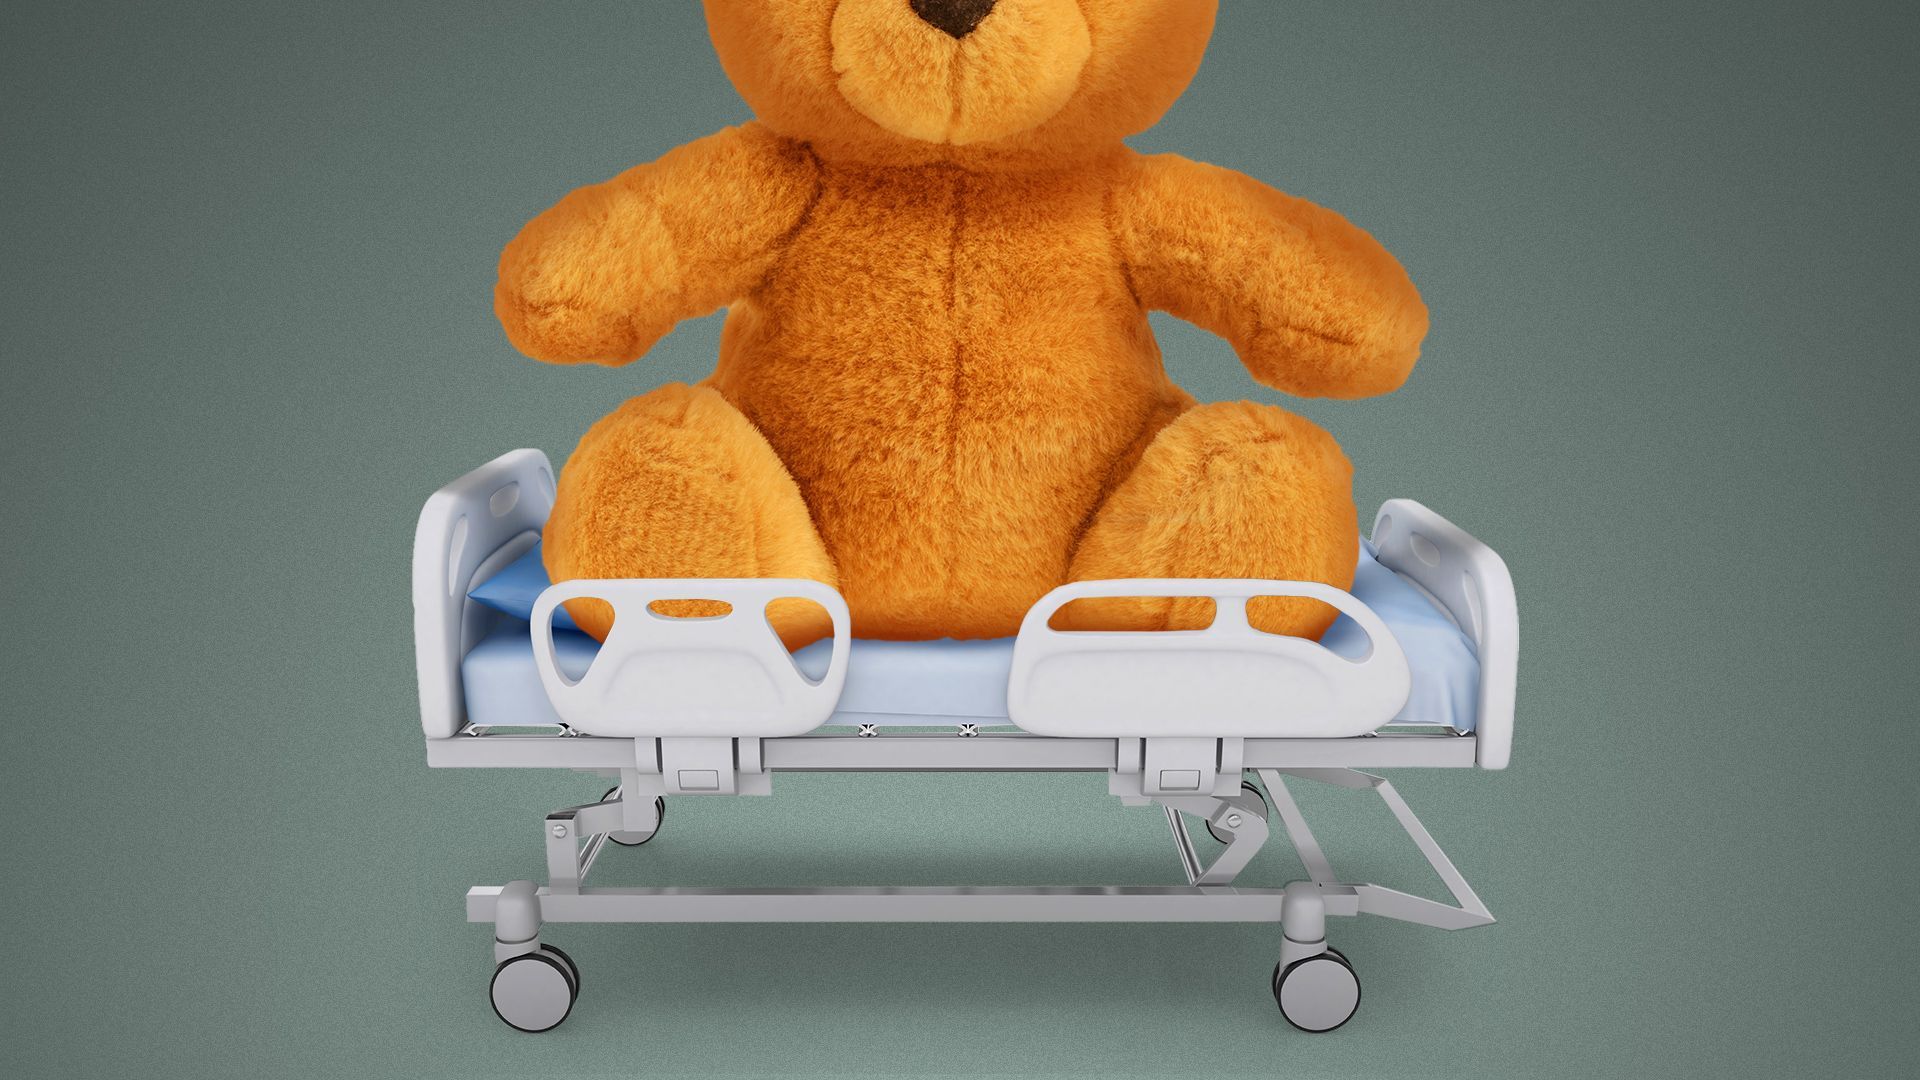 Illustration of a giant teddy bear taking up an entire hospital bed. 